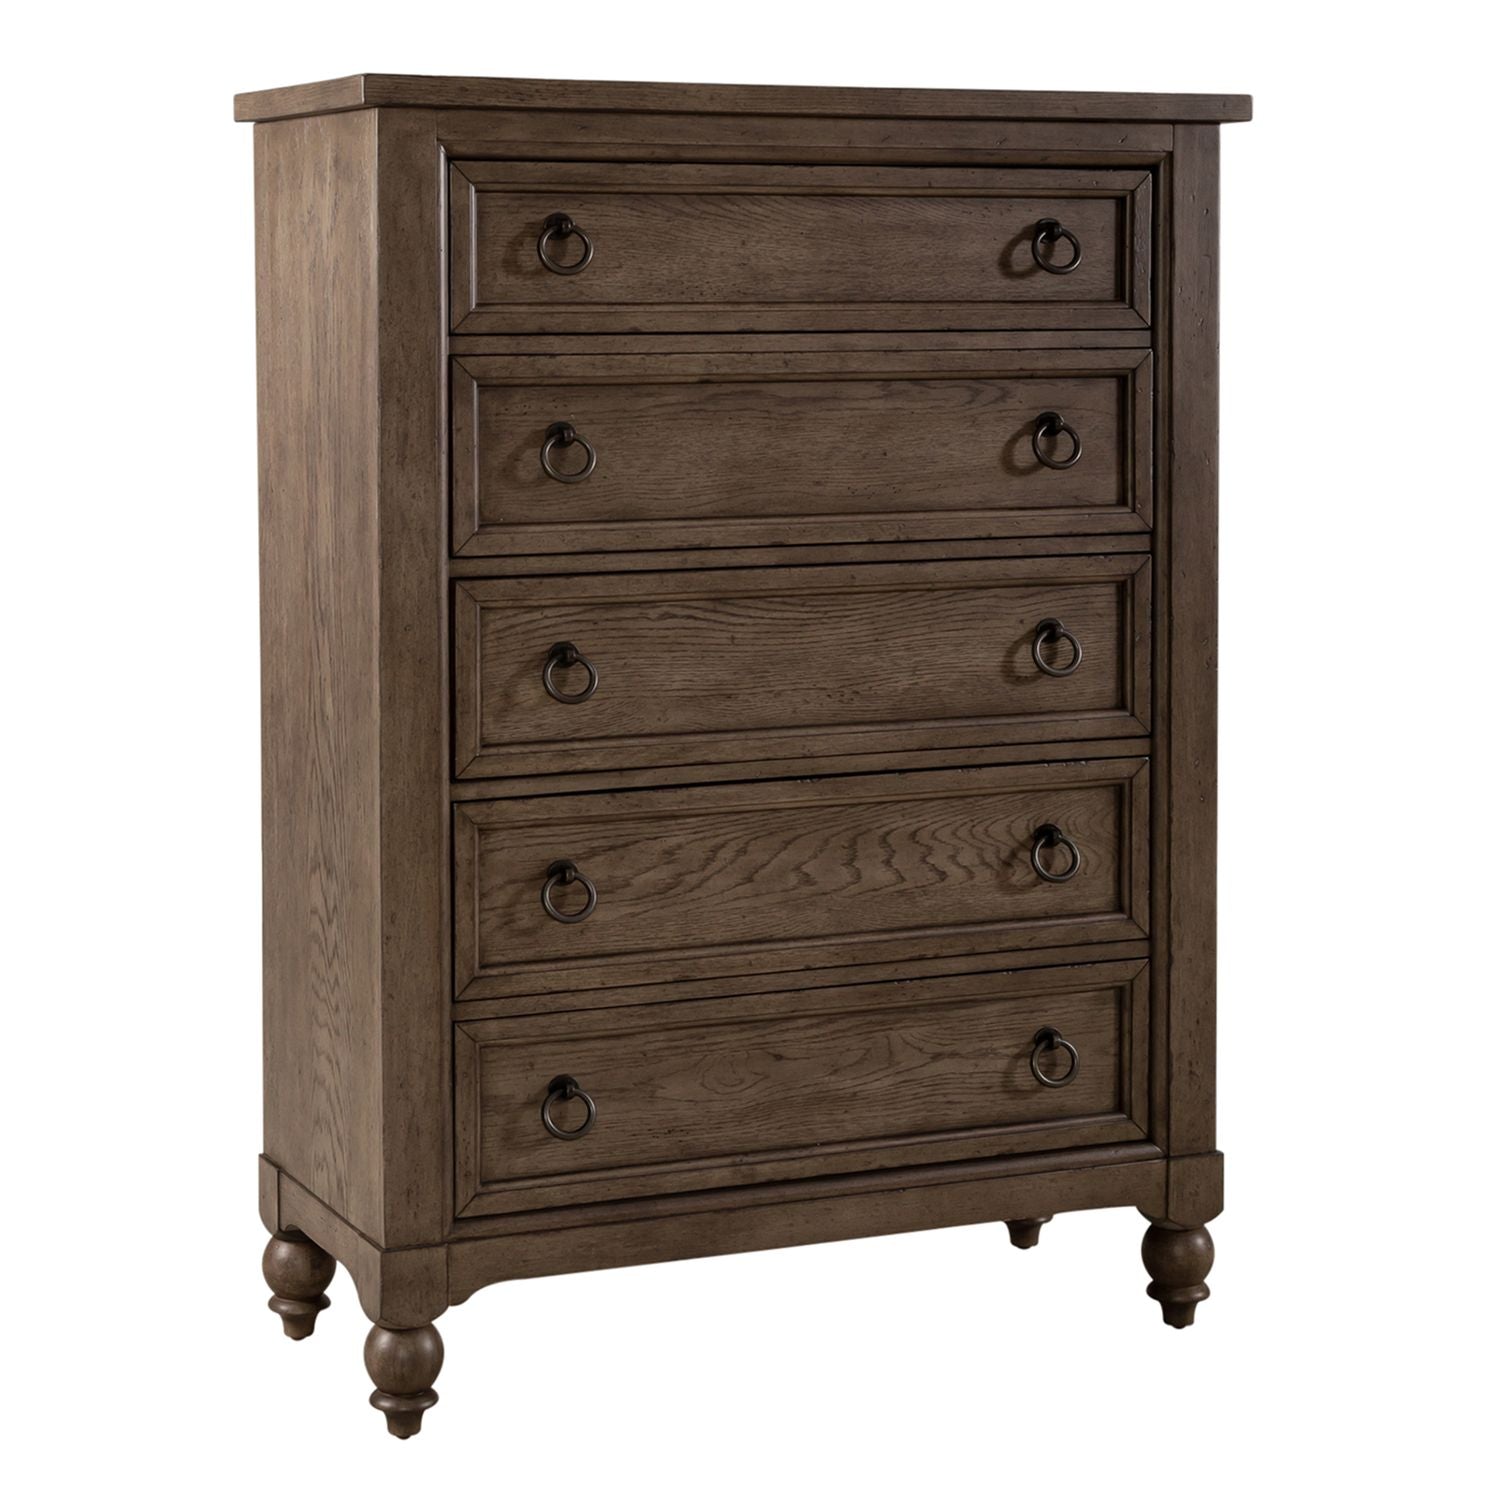 Americana Farmhouse 615-BR Tufted Panel Shelter Bedroom Collection from Liberty Furniture